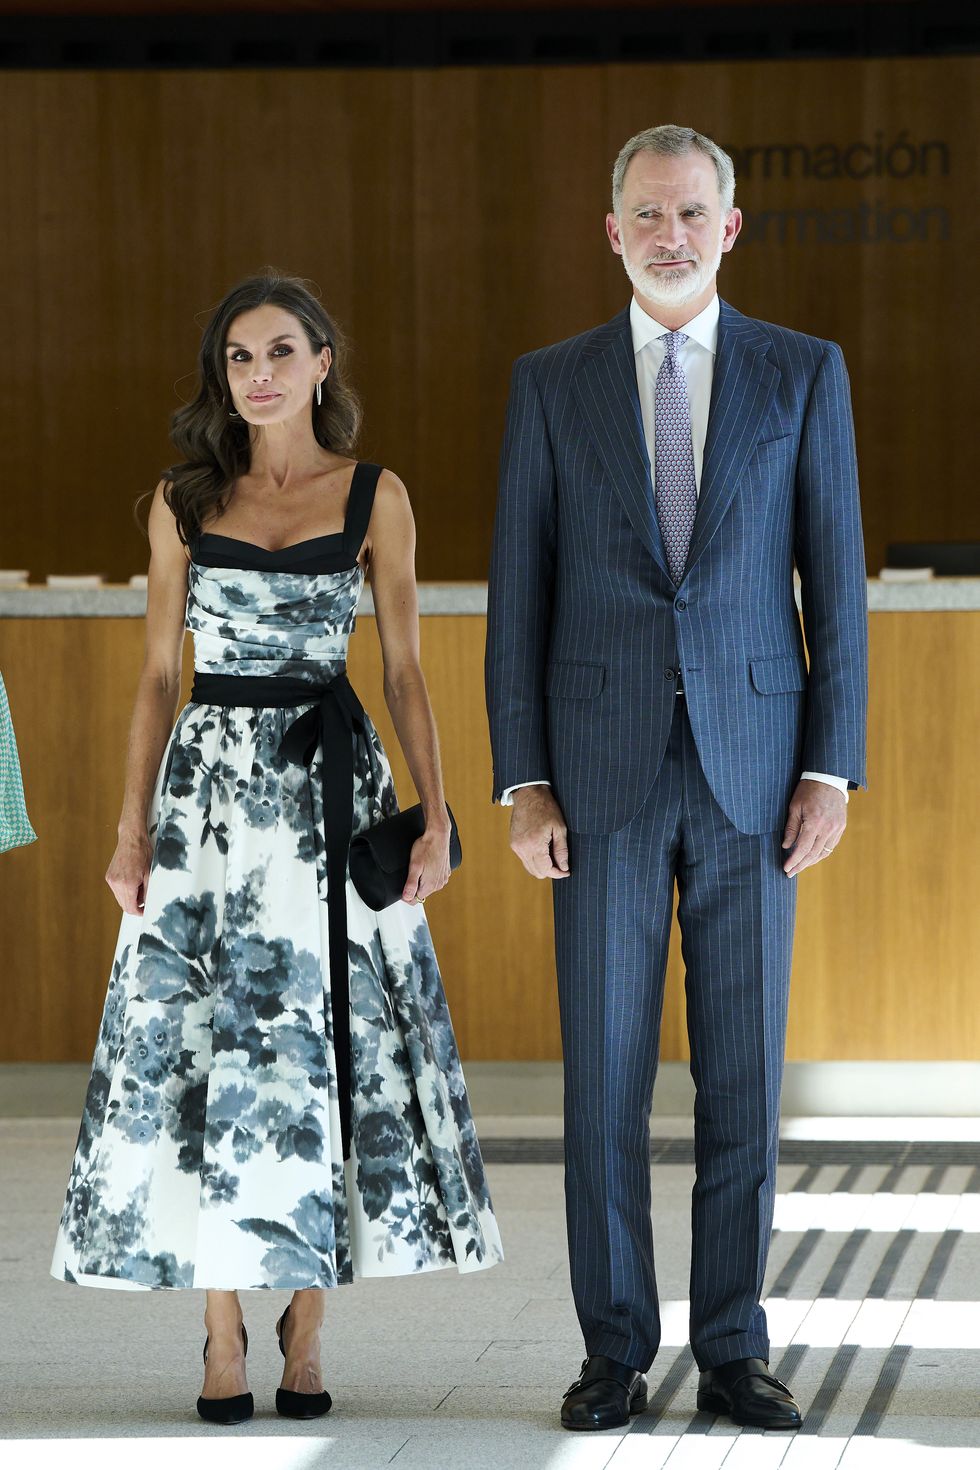 Madrid, Spain On July 25, King Felipe VI of Spain and Queen Letizia of Spain will open the gallery of the royal collections of the new museum on July 25, 2023 in Madrid, Spain.  Photo: Carlos Alvarezgetty images